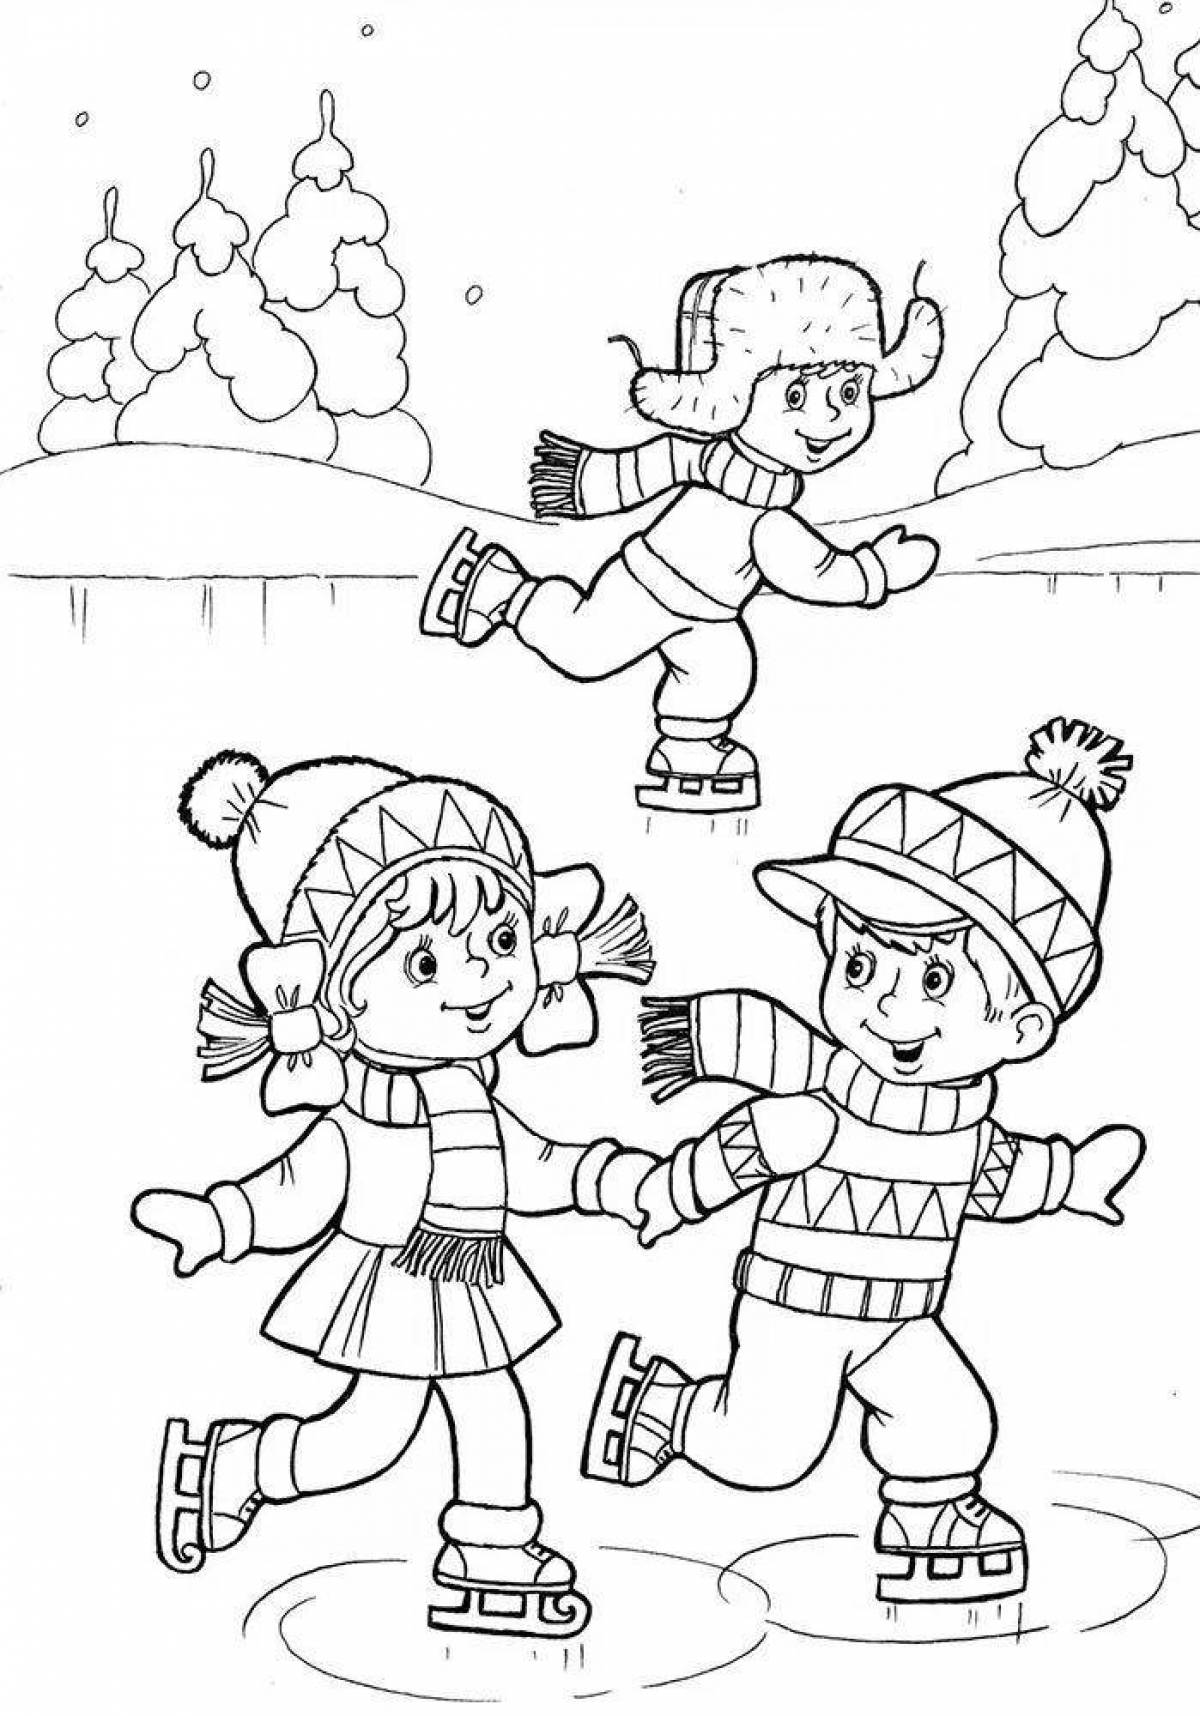 Adorable coloring book winter fun for kids 5 years old